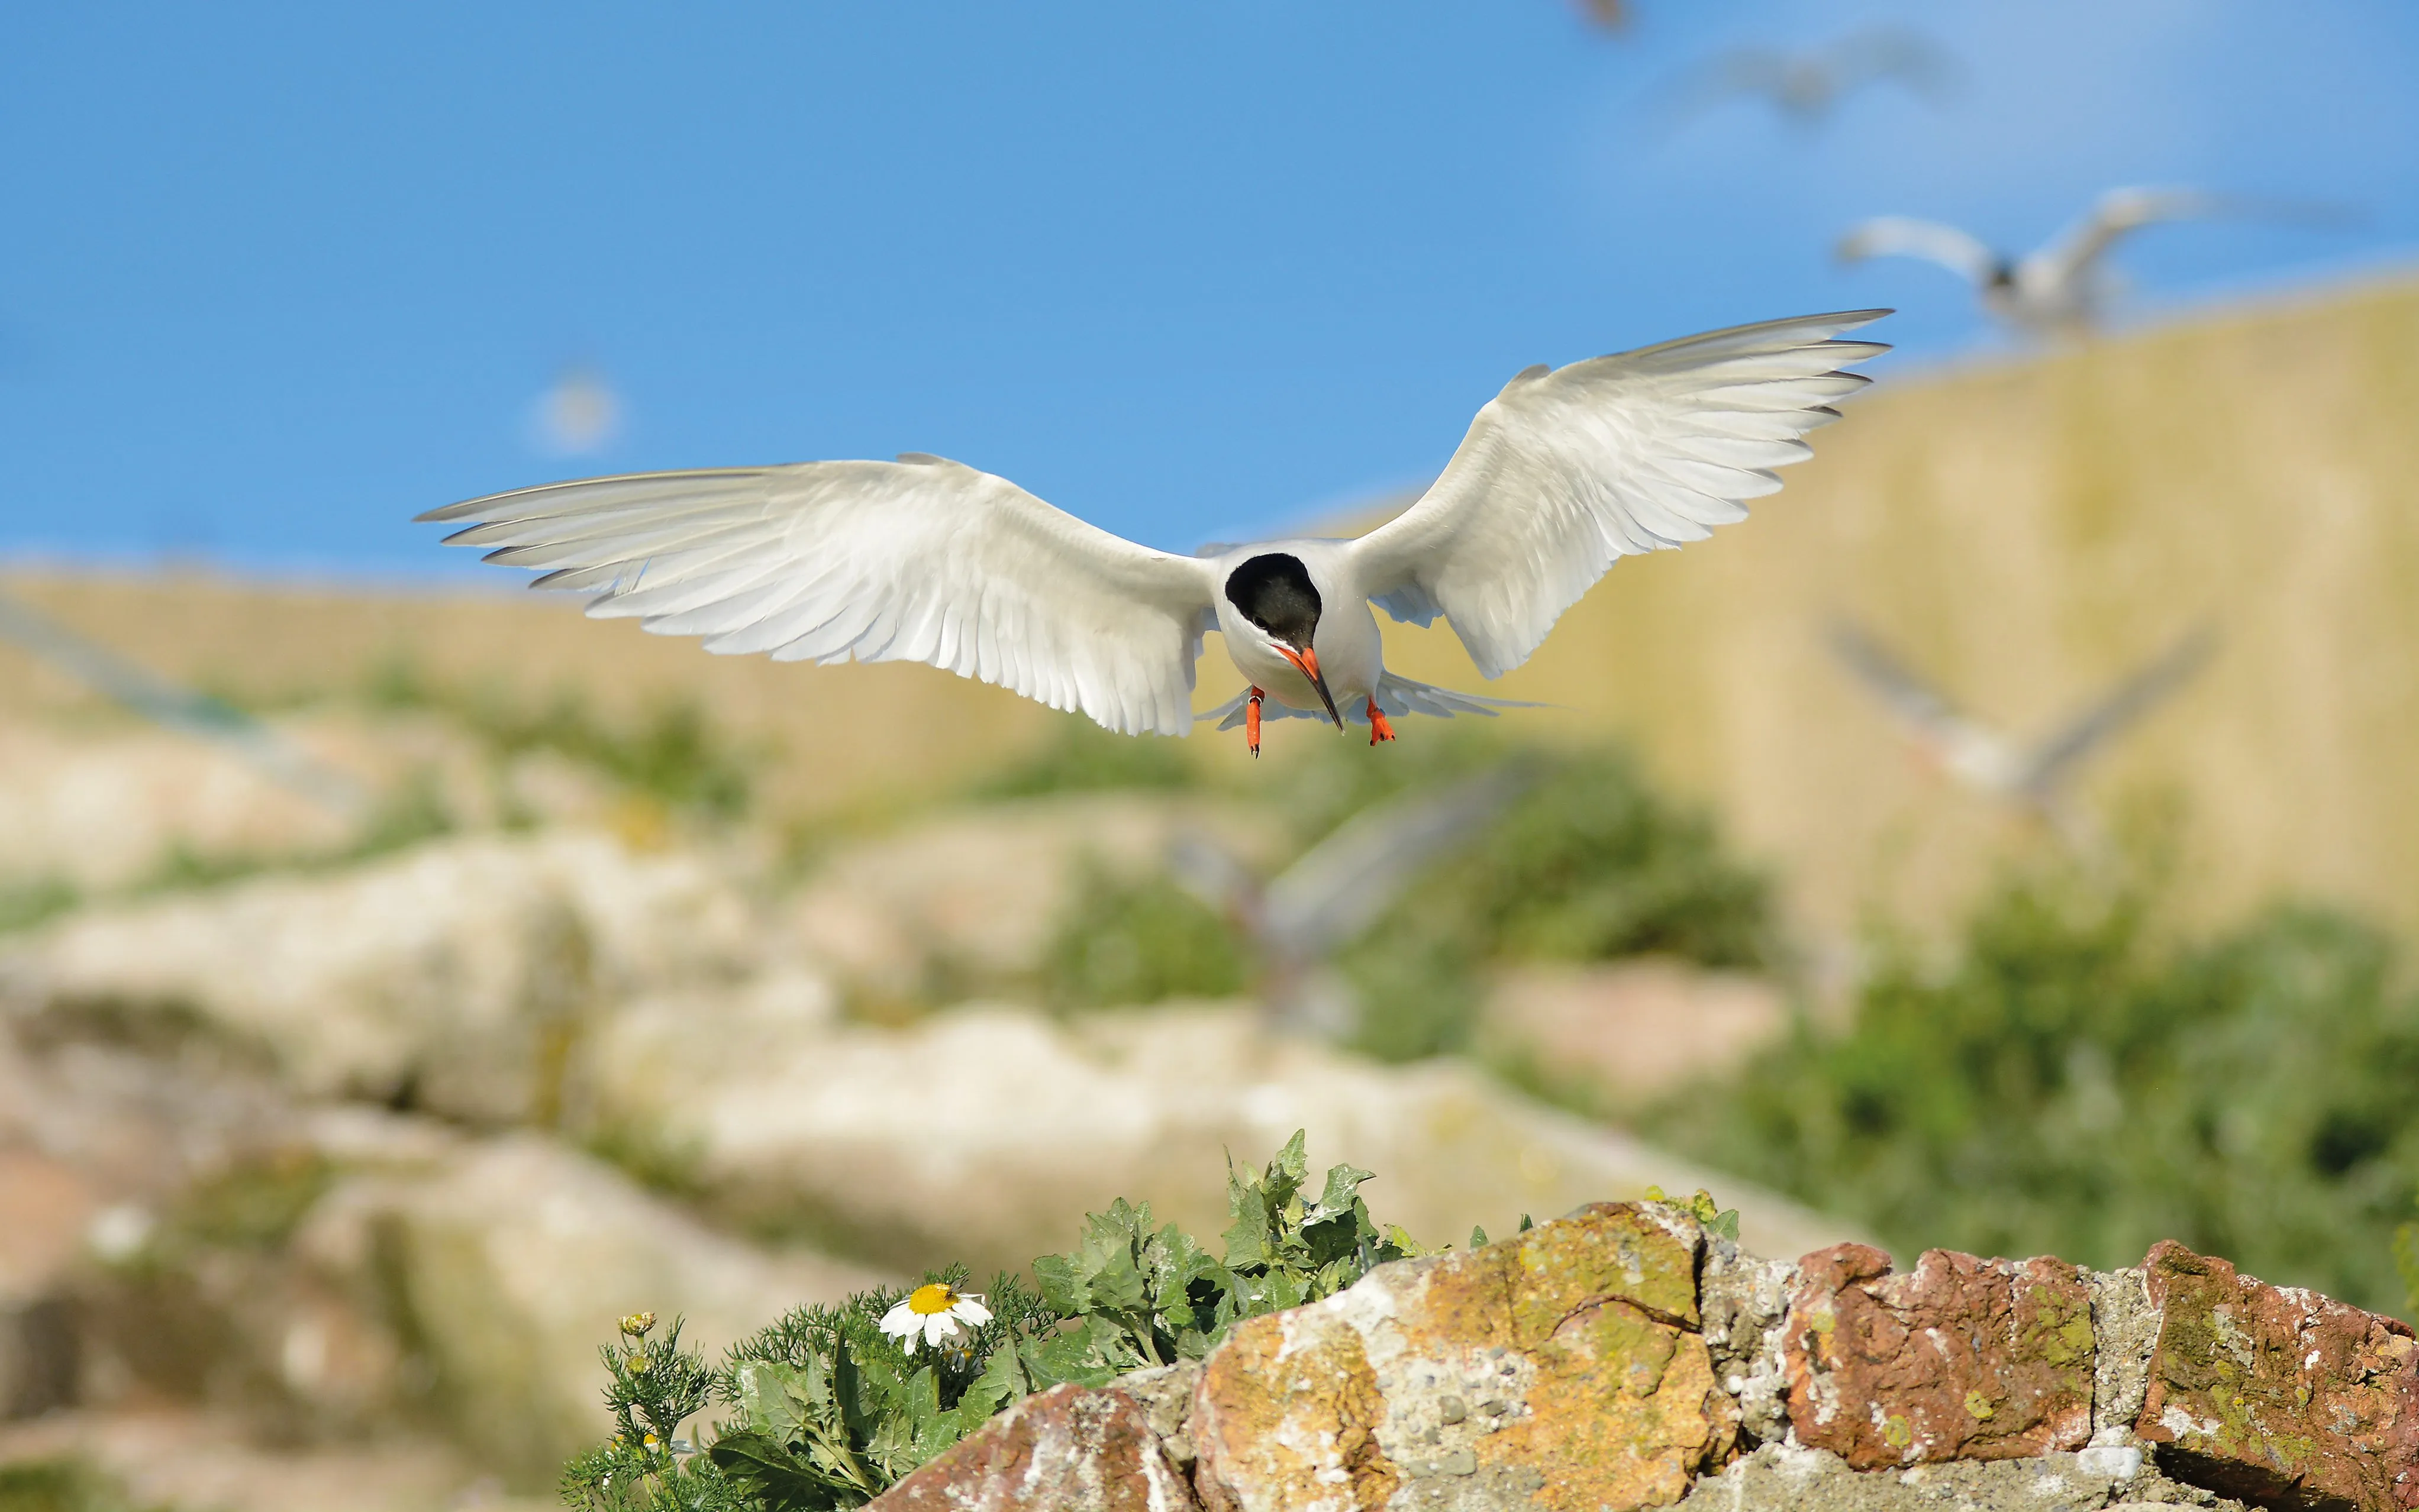 A Roseate Tern in flight with its wings stretched out, there are birds flying in the background against a clear blue sky  